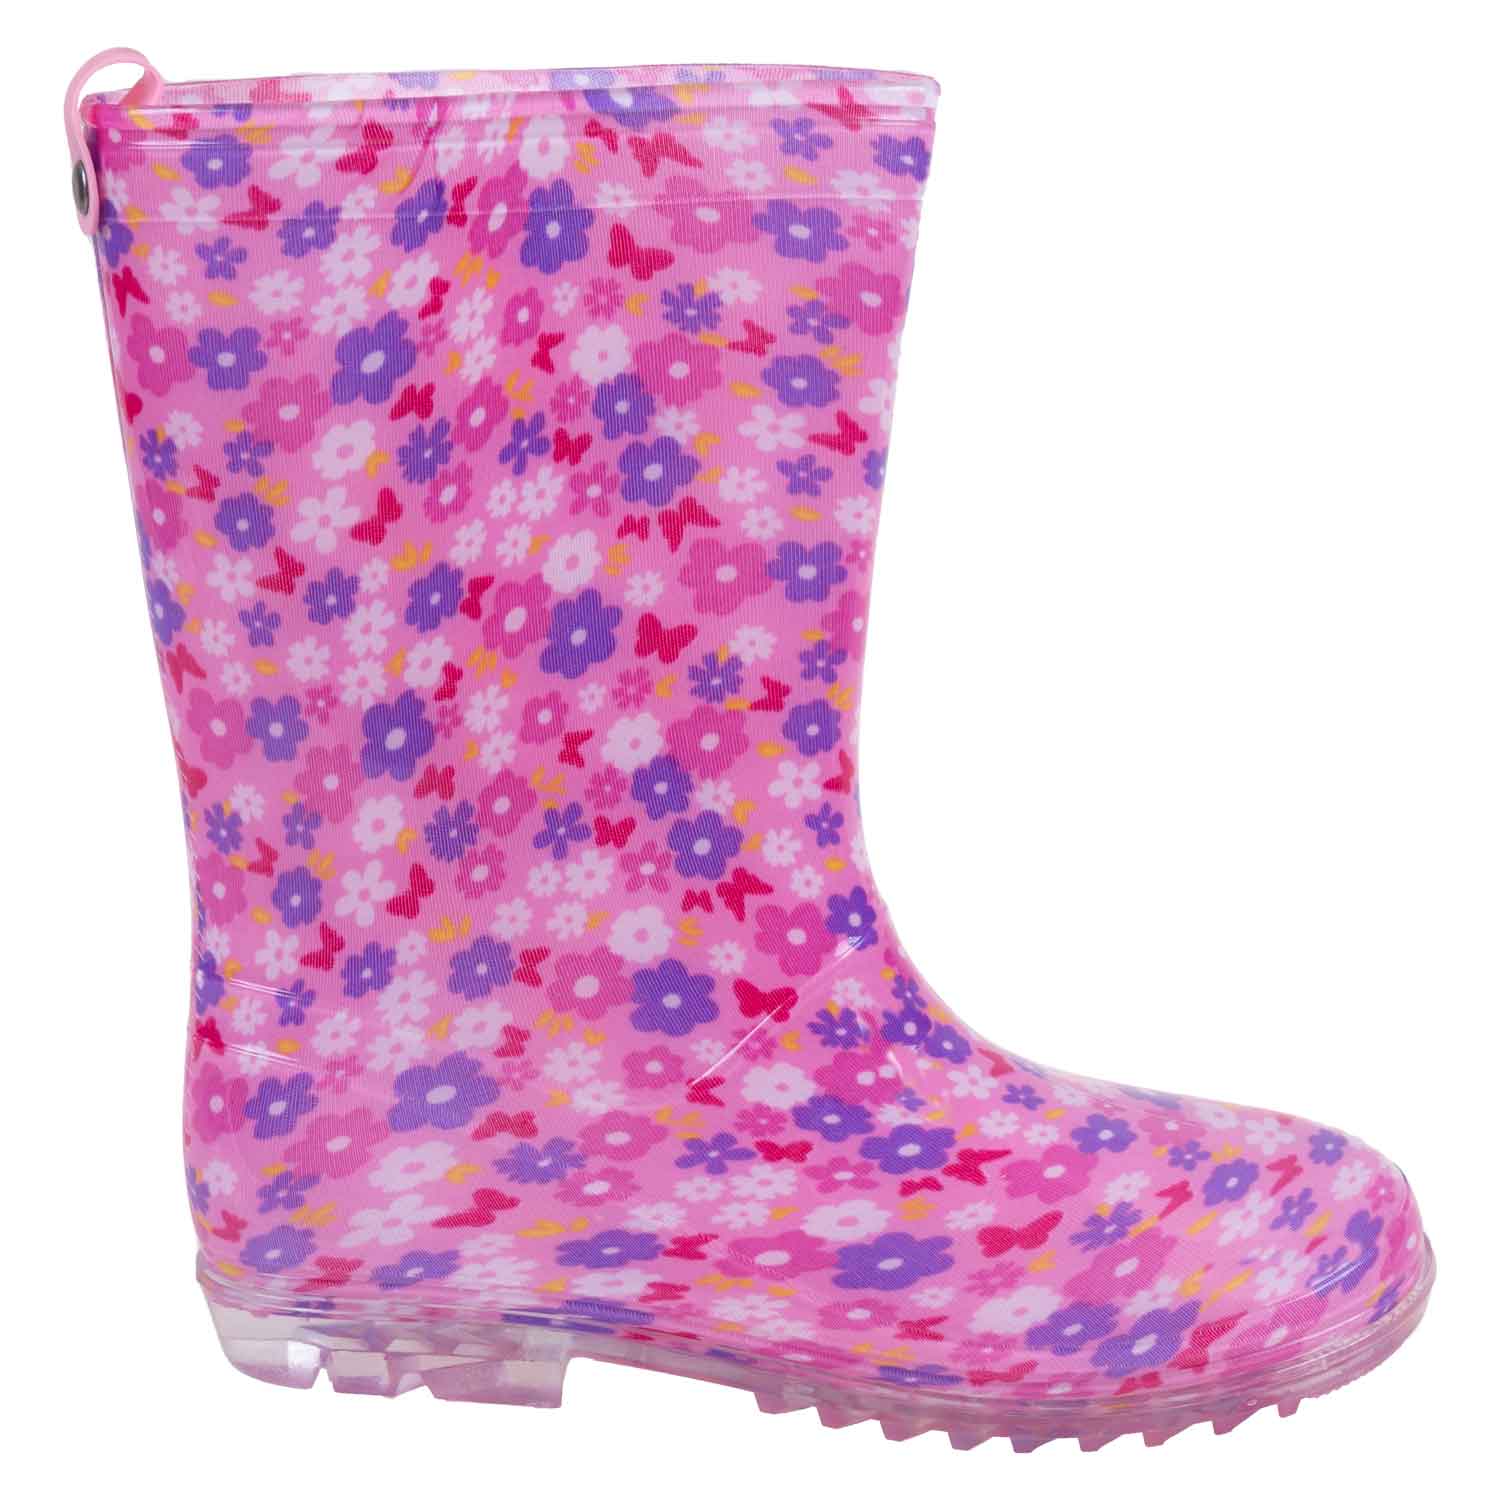 Rubber rain boots - Ditsy daisies, size 3